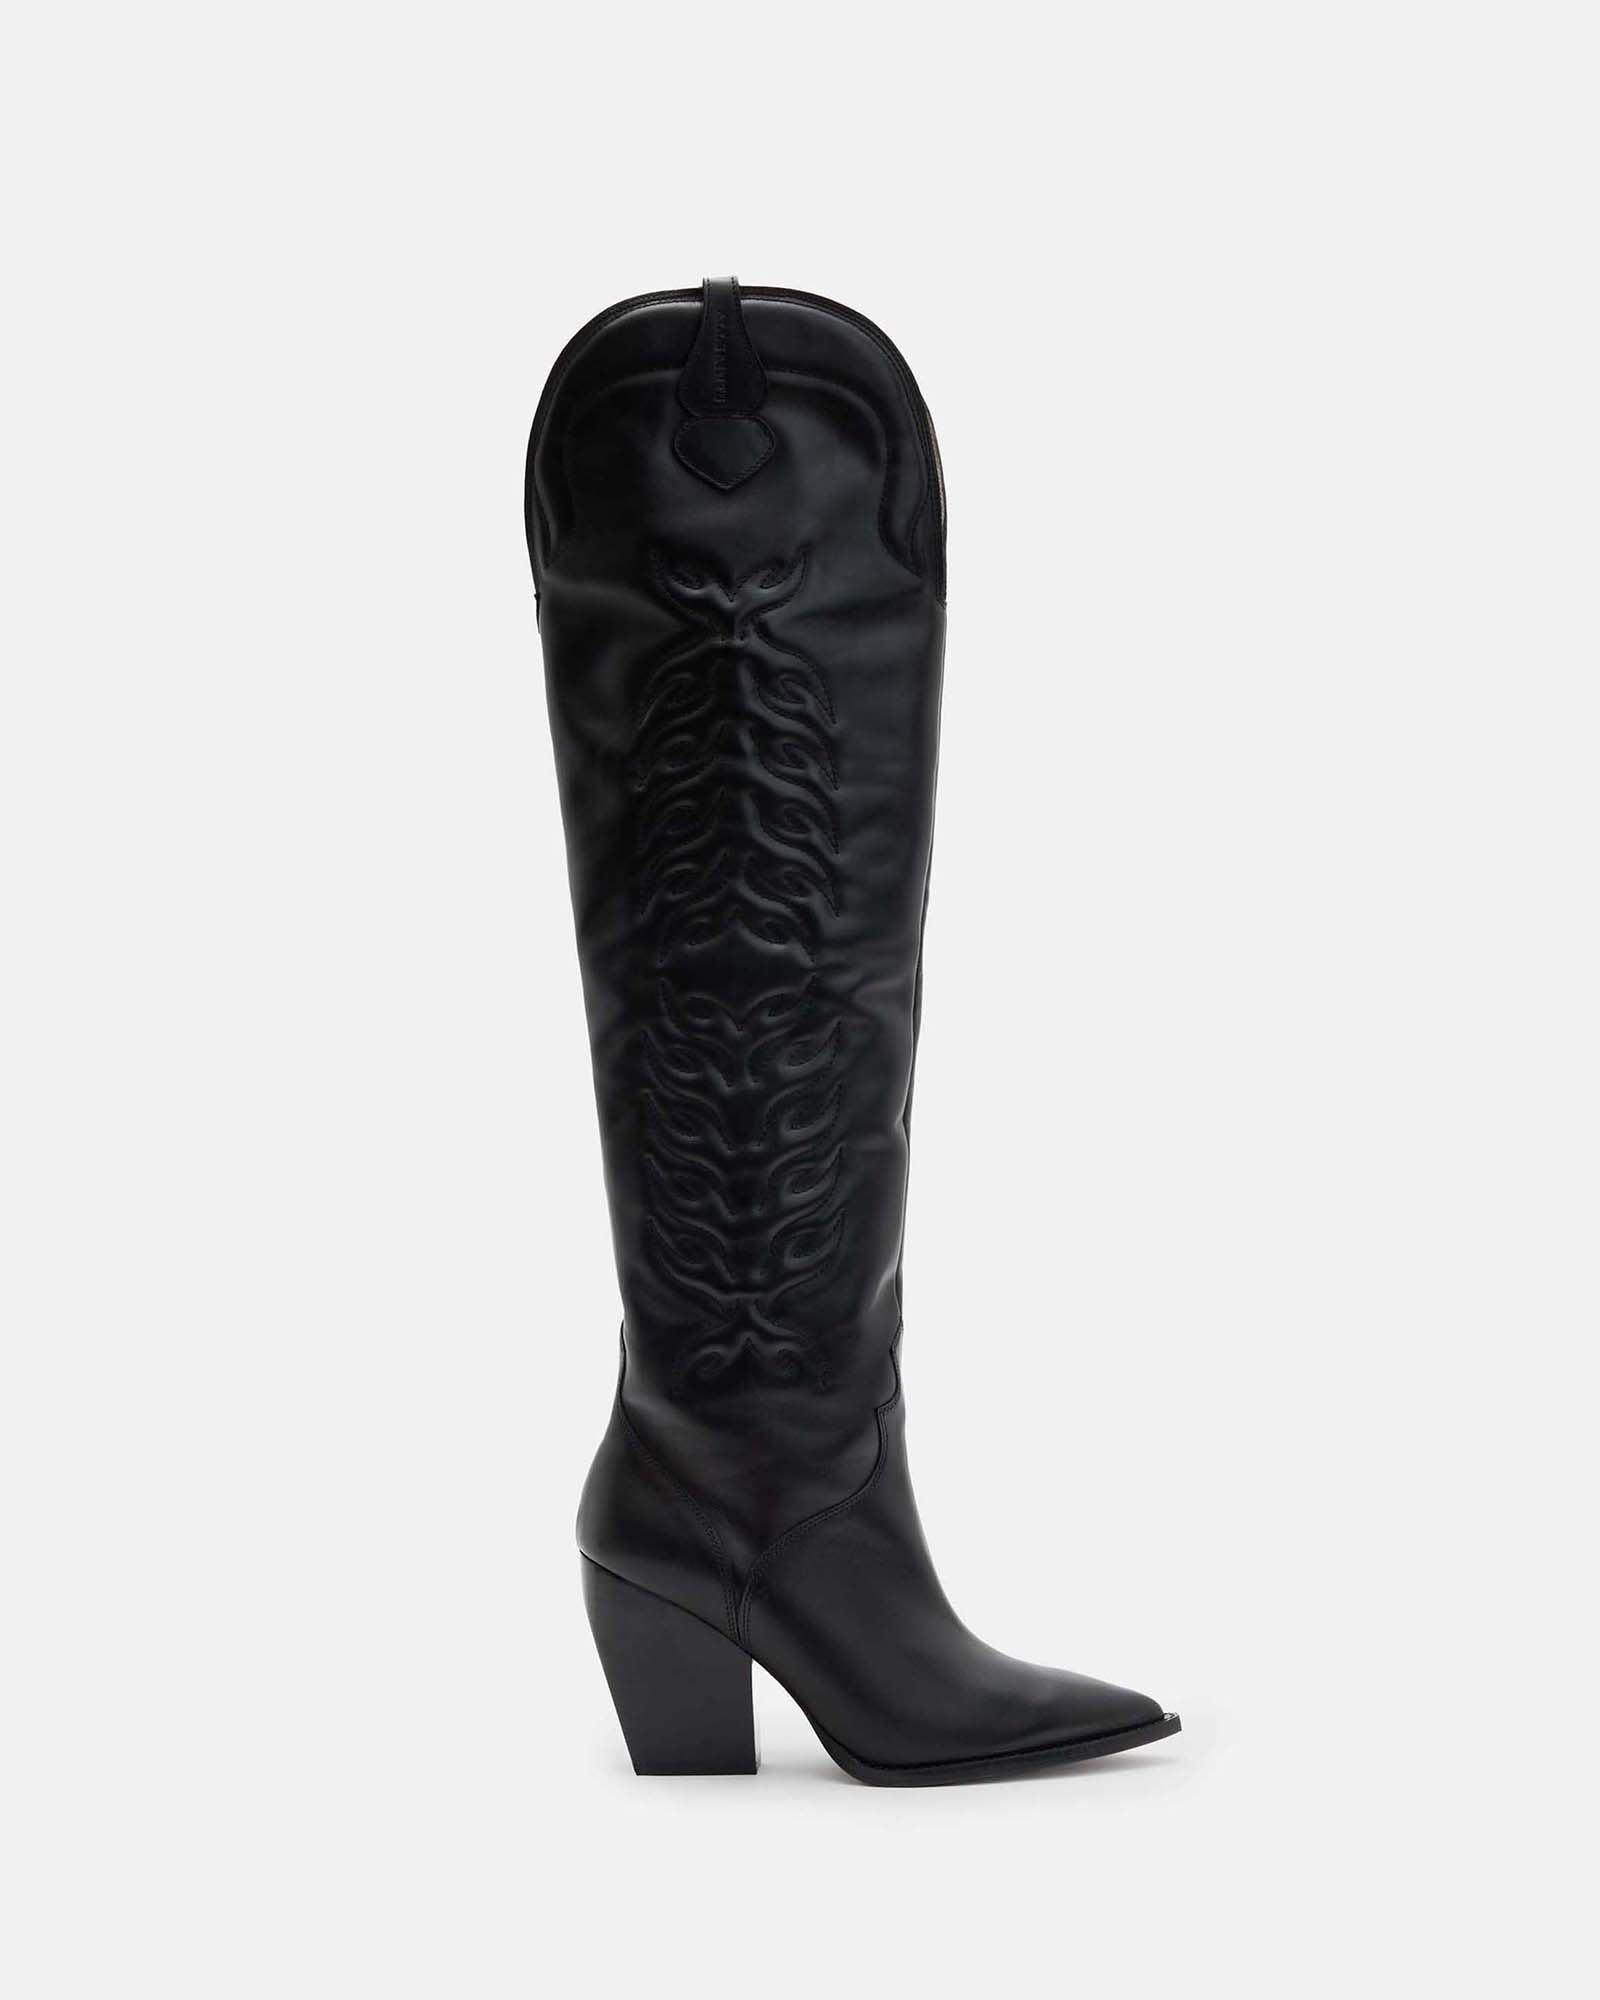 AllSaints Roxanne Knee High Western Leather Boots,, Black